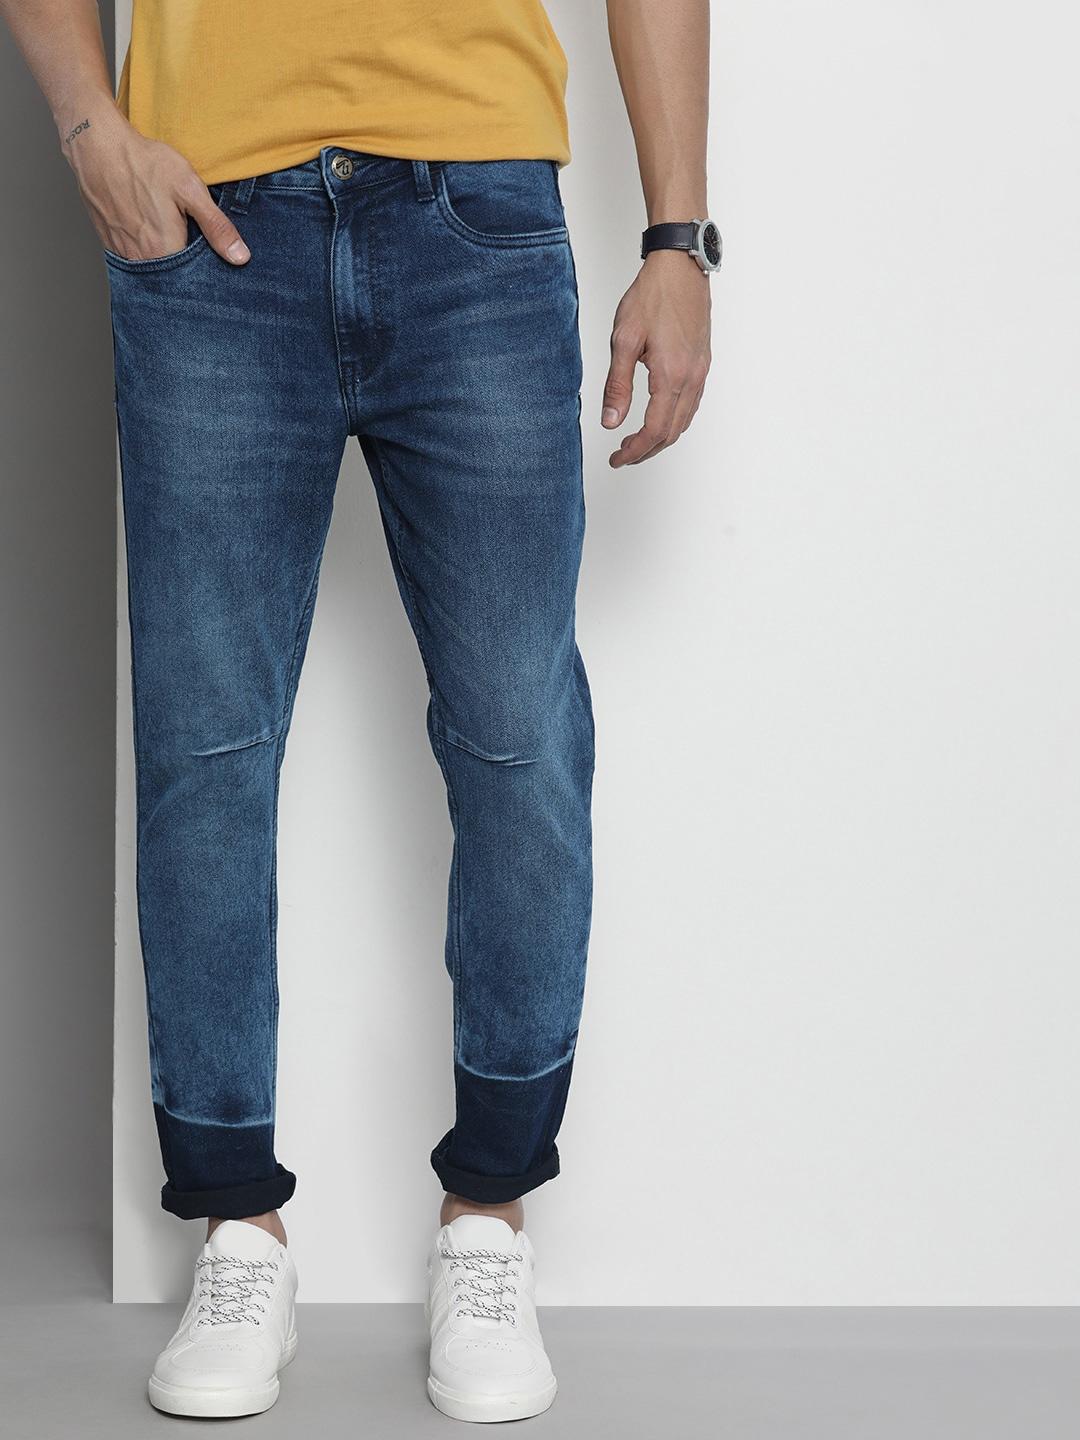 The Indian Garage Co Men Blue Relaxed Fit Light Fade Stretchable Jeans